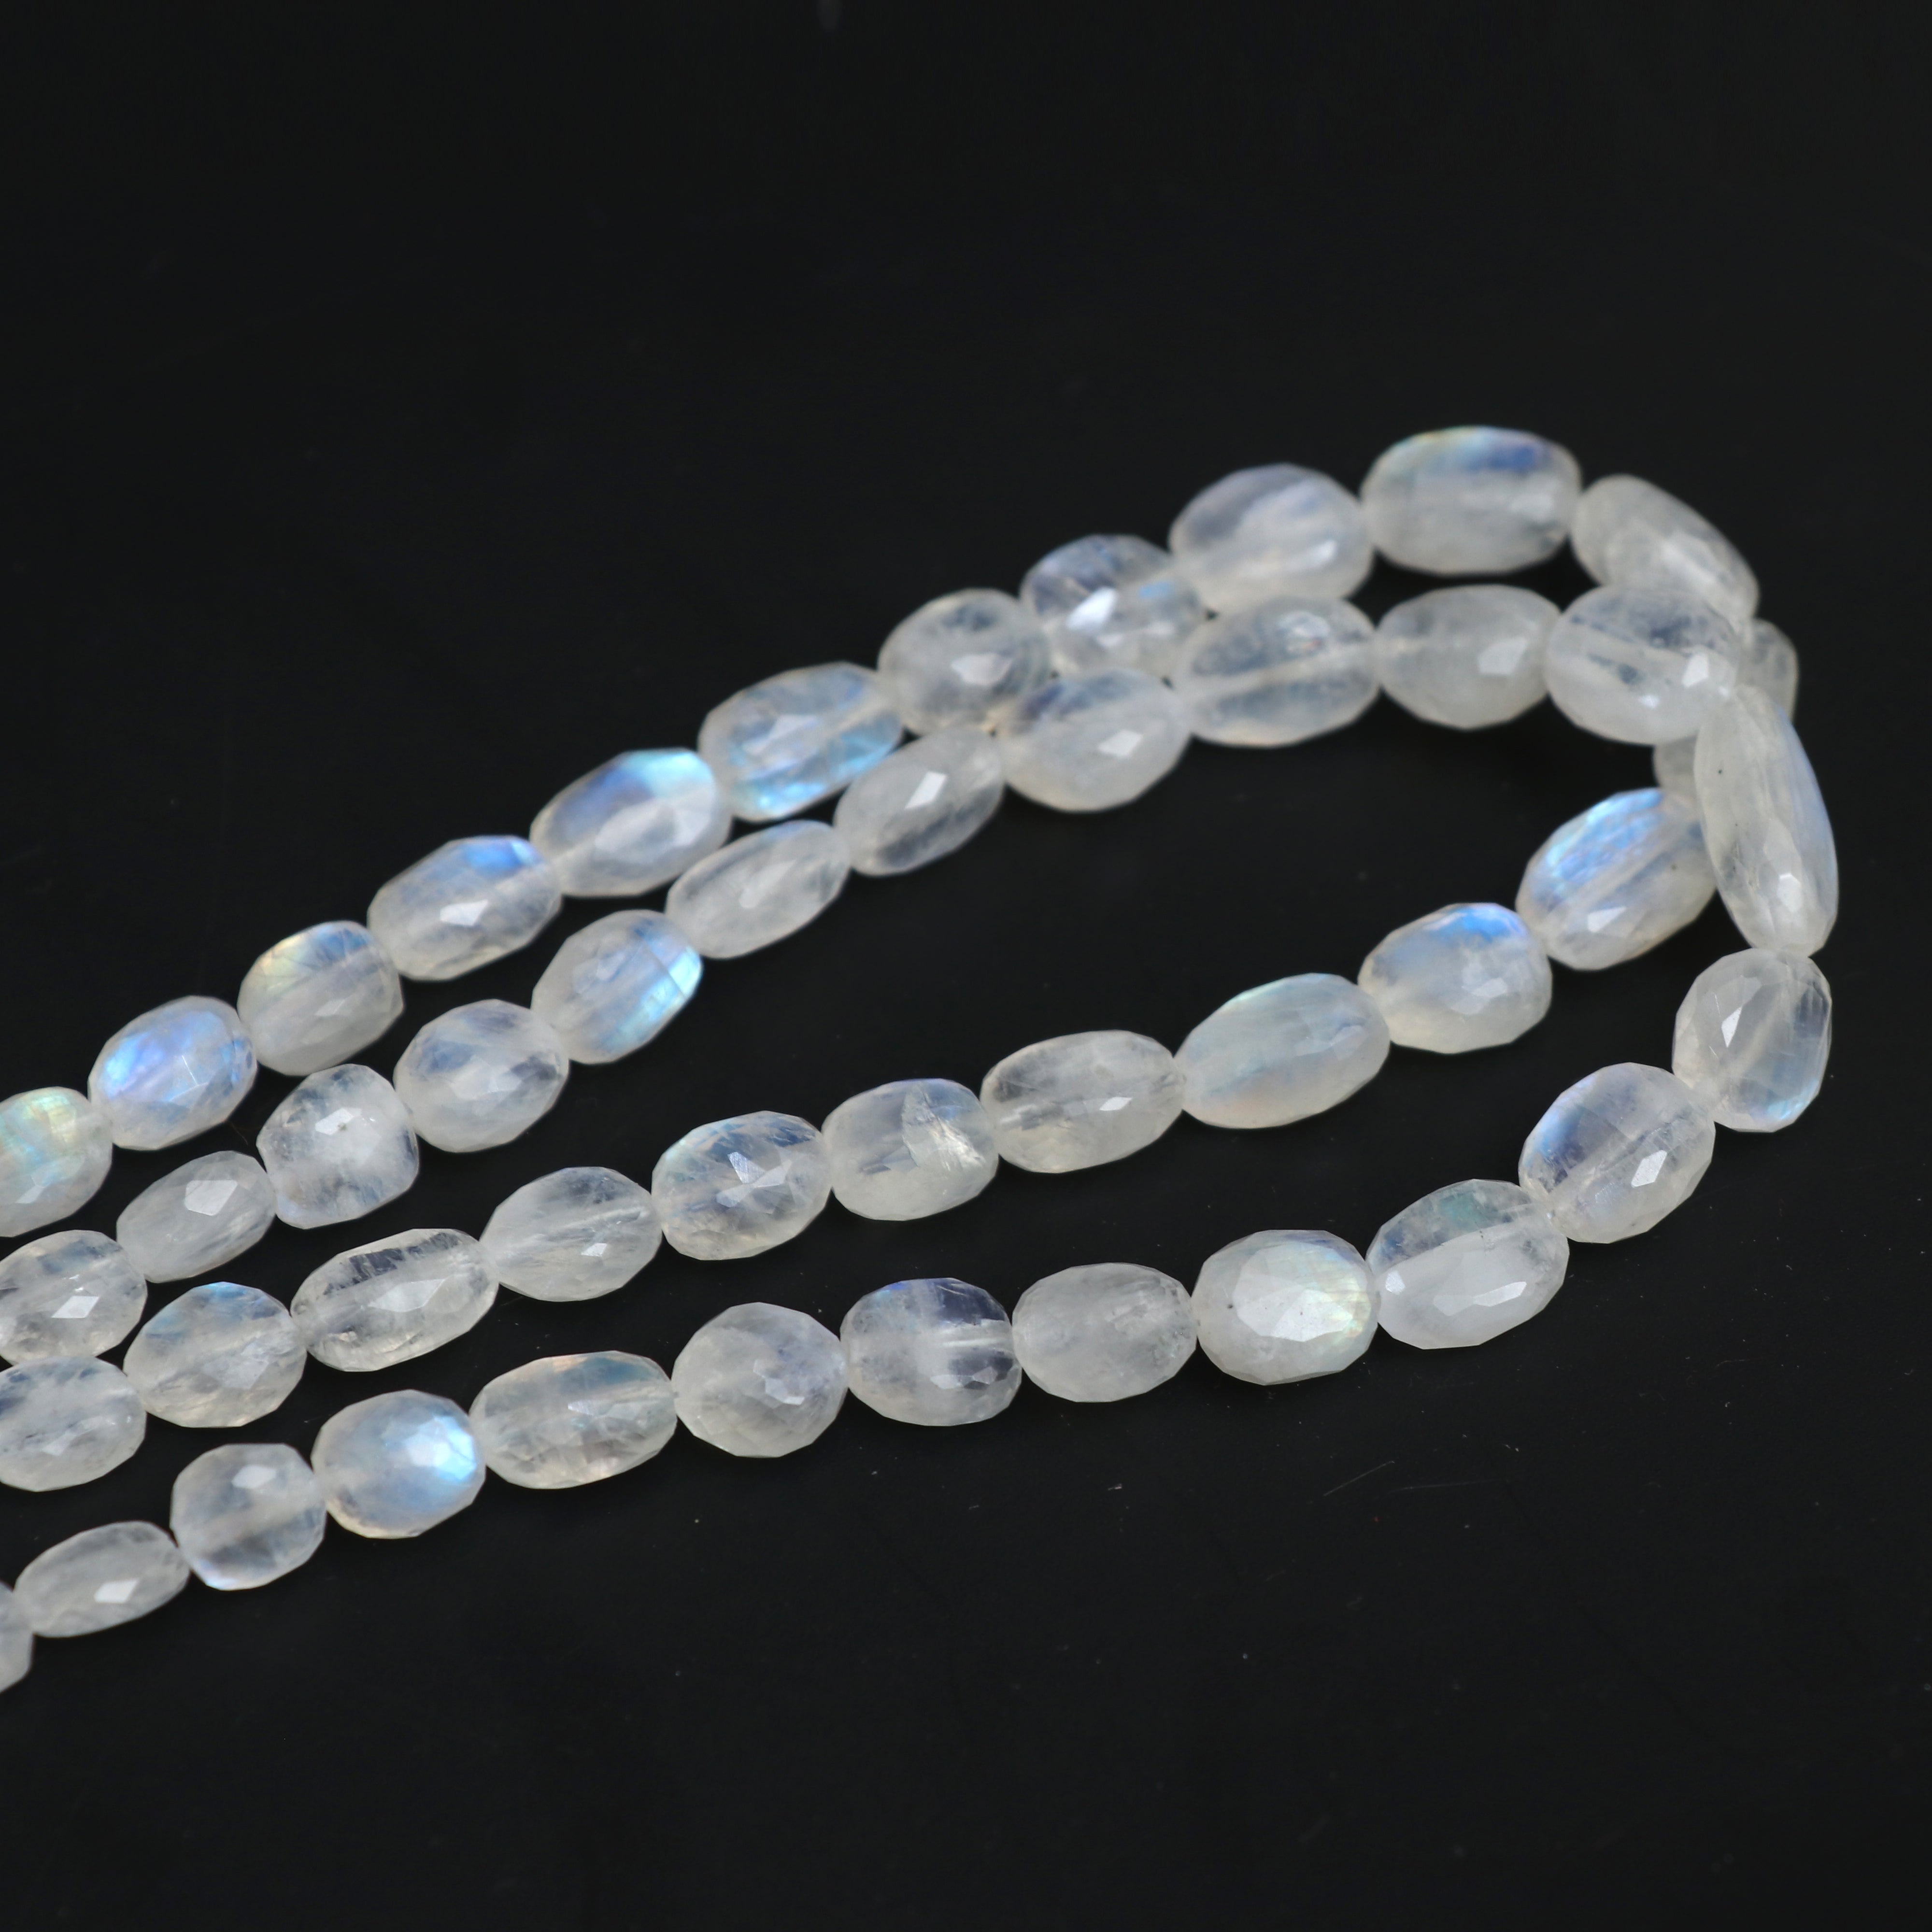 Rainbow Moonstone Faceted Tumble Beads, 5x6mm To 8x14mm, Moonstone Jewelry  Making Beads, 18 Inch Full Strand, Price Per Strand